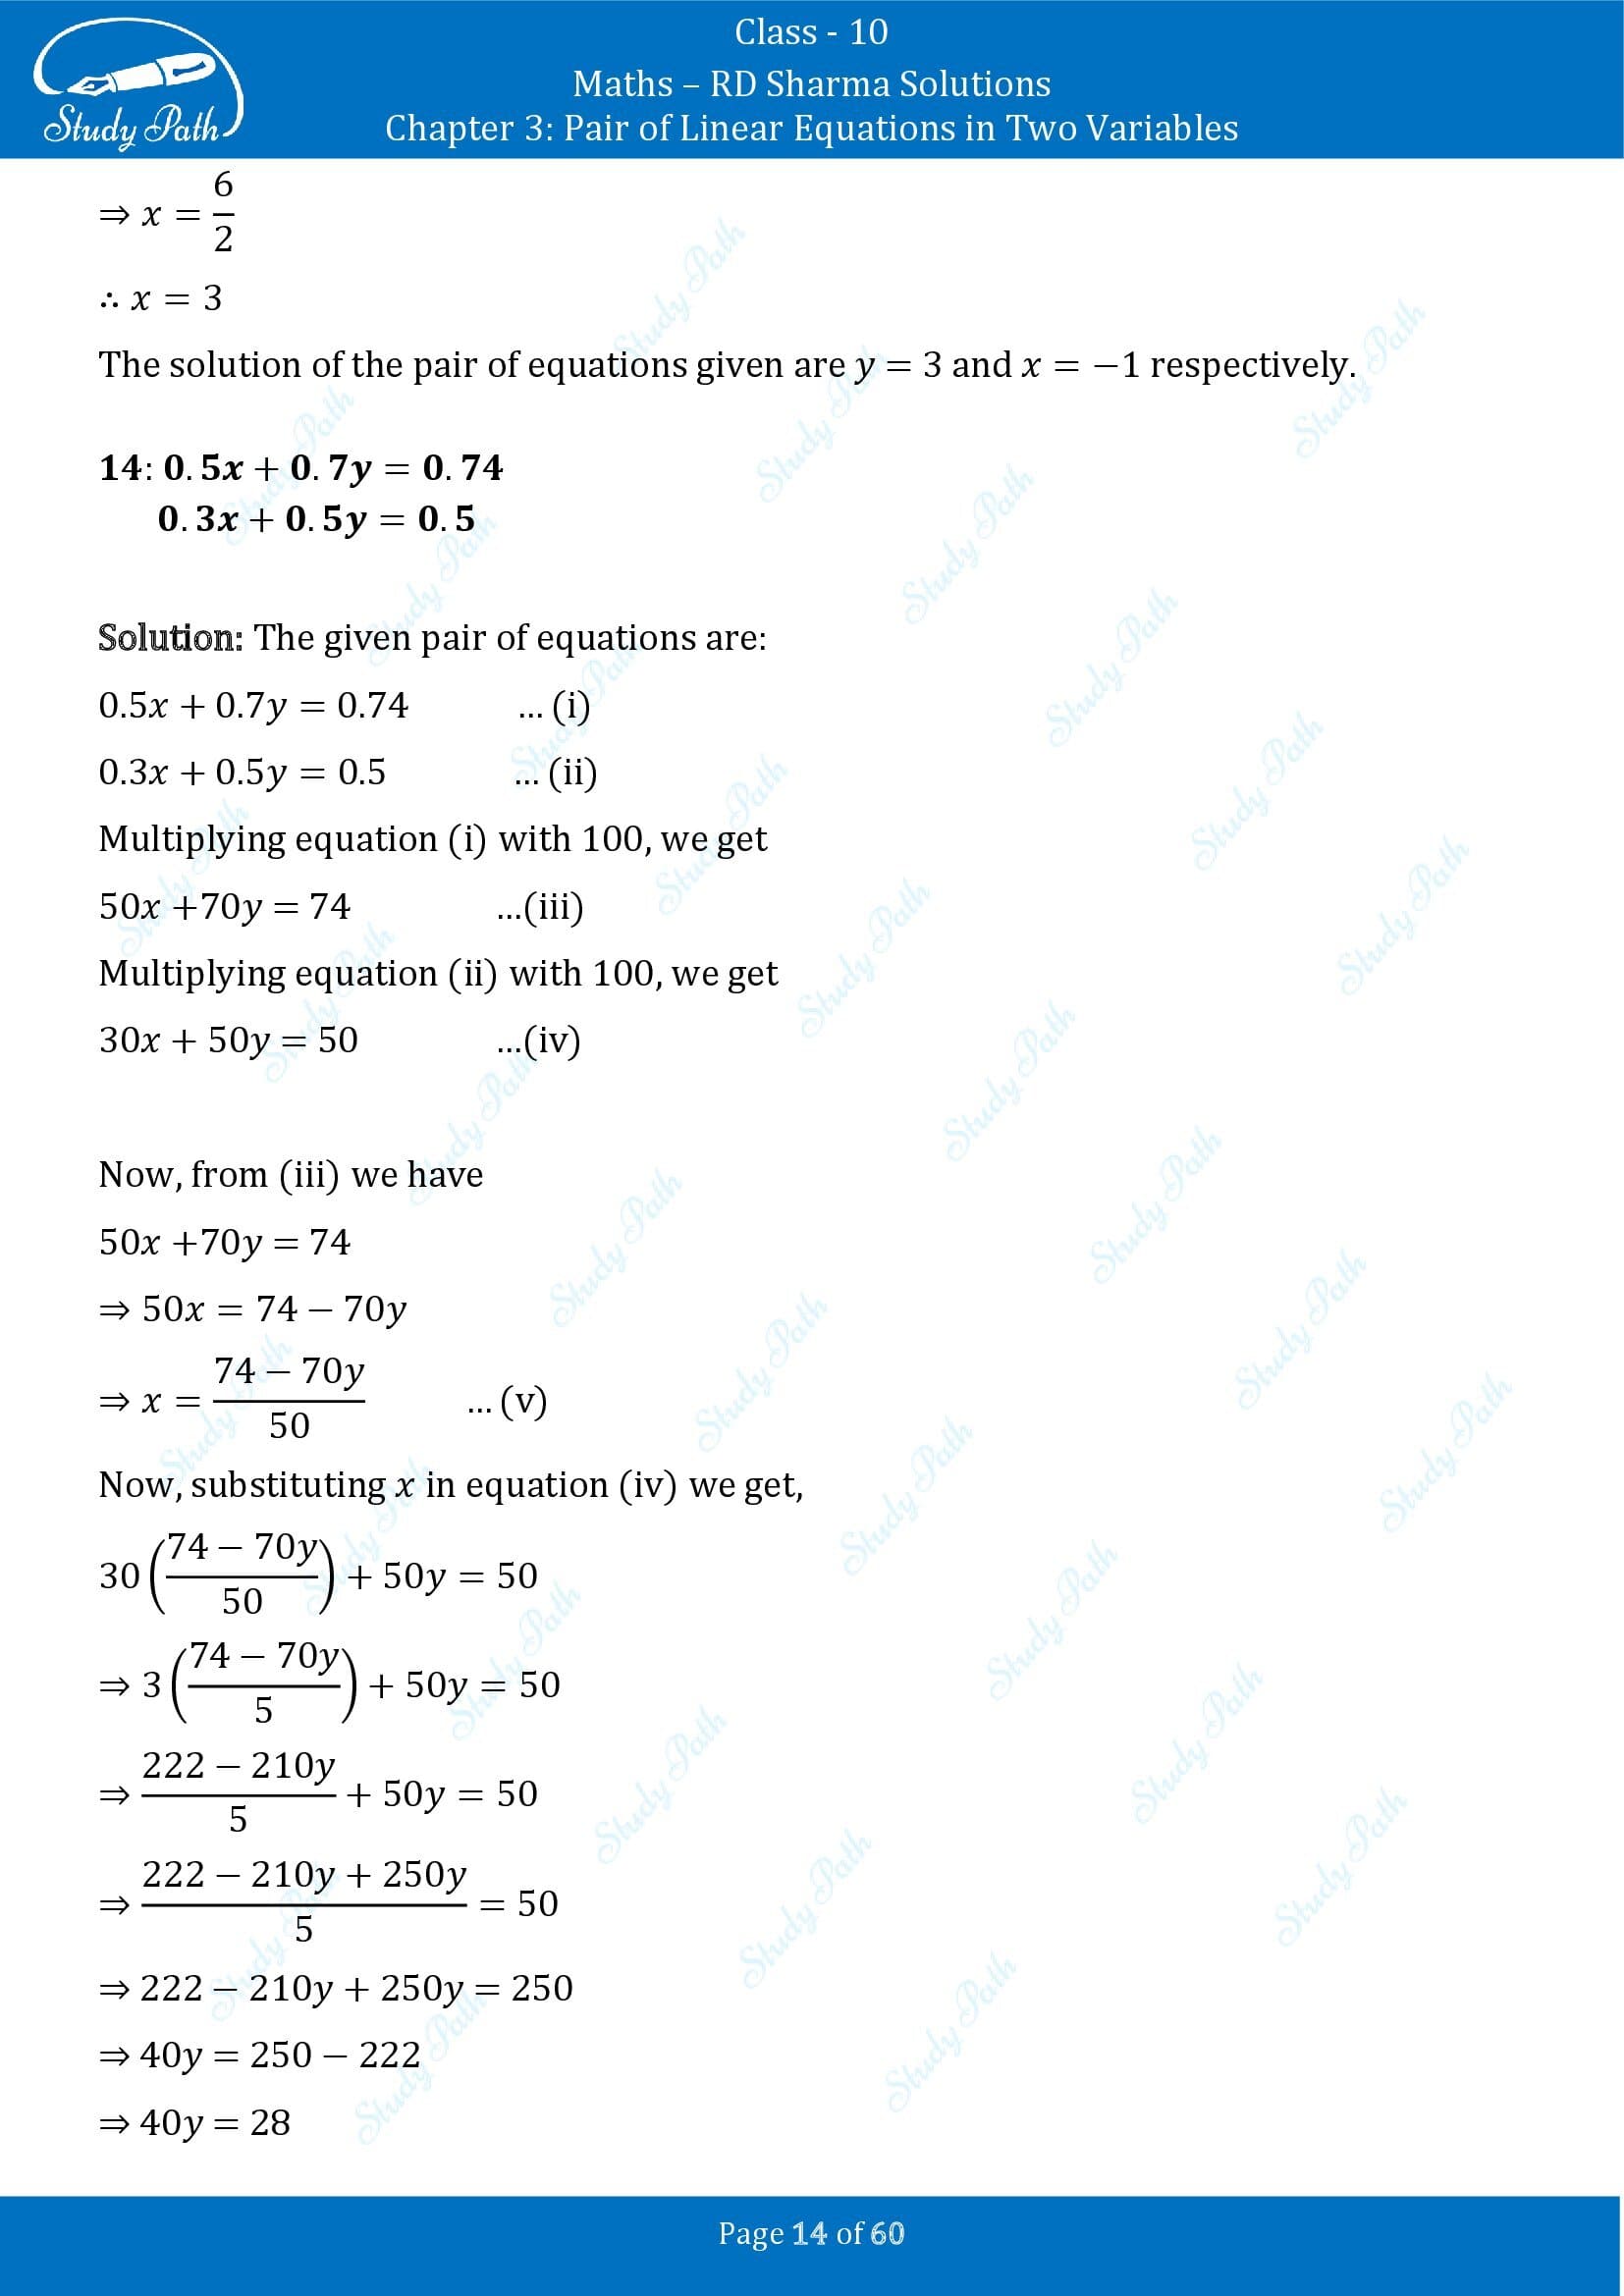 RD Sharma Solutions Class 10 Chapter 3 Pair of Linear Equations in Two Variables Exercise 3.3 00014